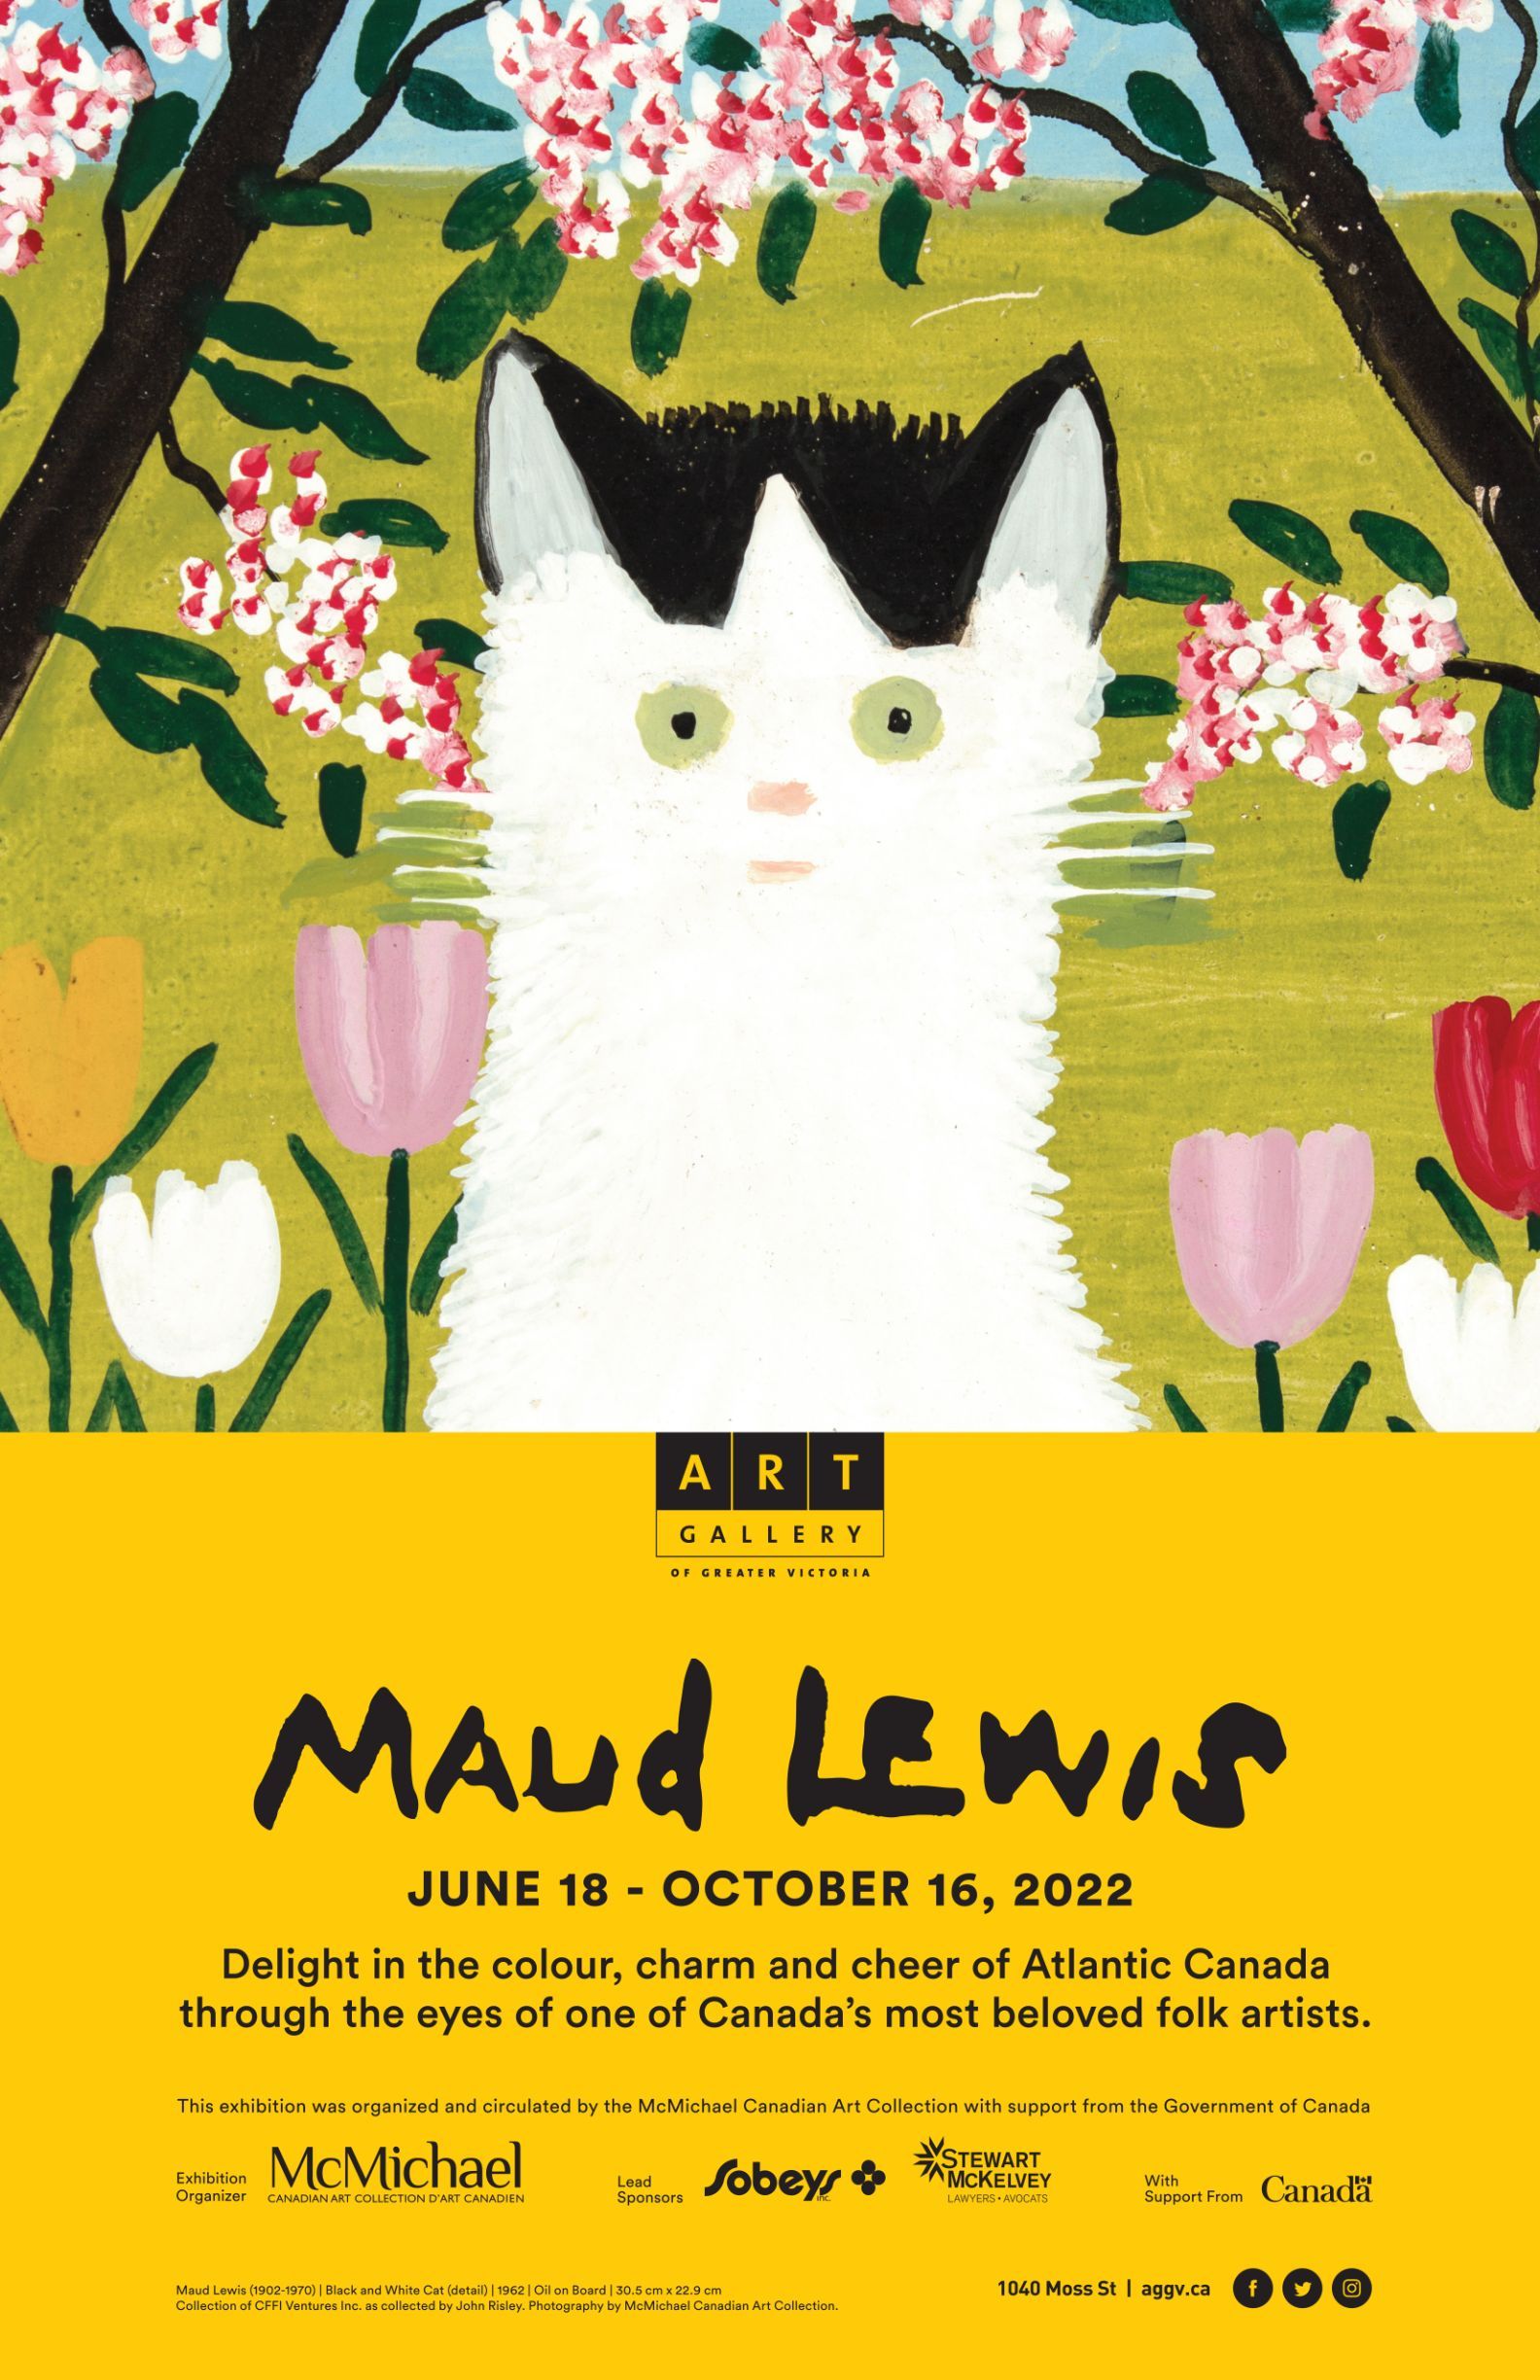 AGGV_MaudLewis_Oct22